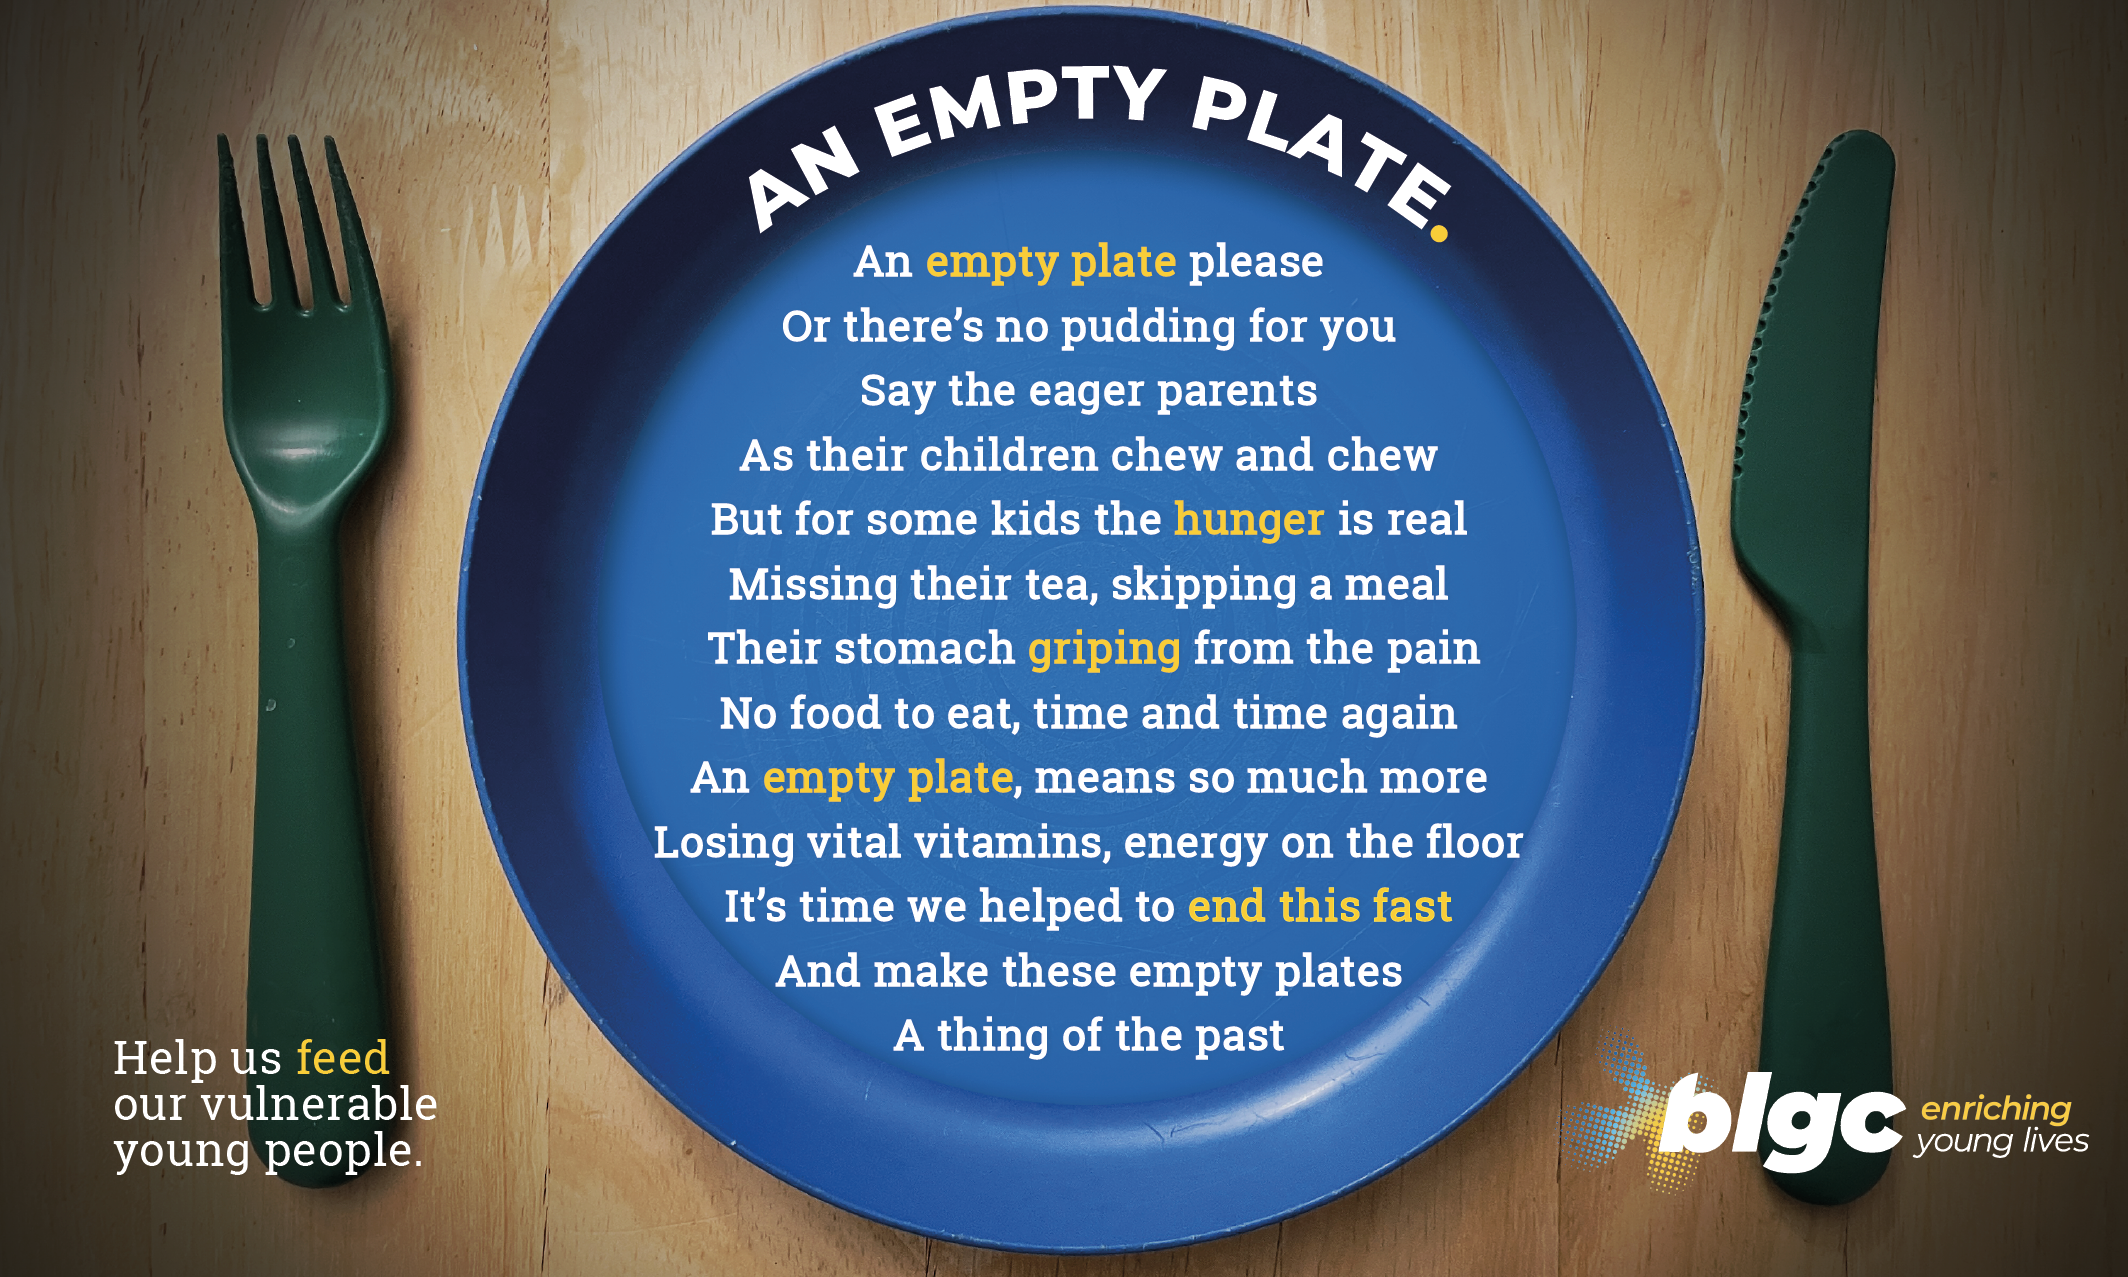 MUSE Advertising Awards - An Empty Plate